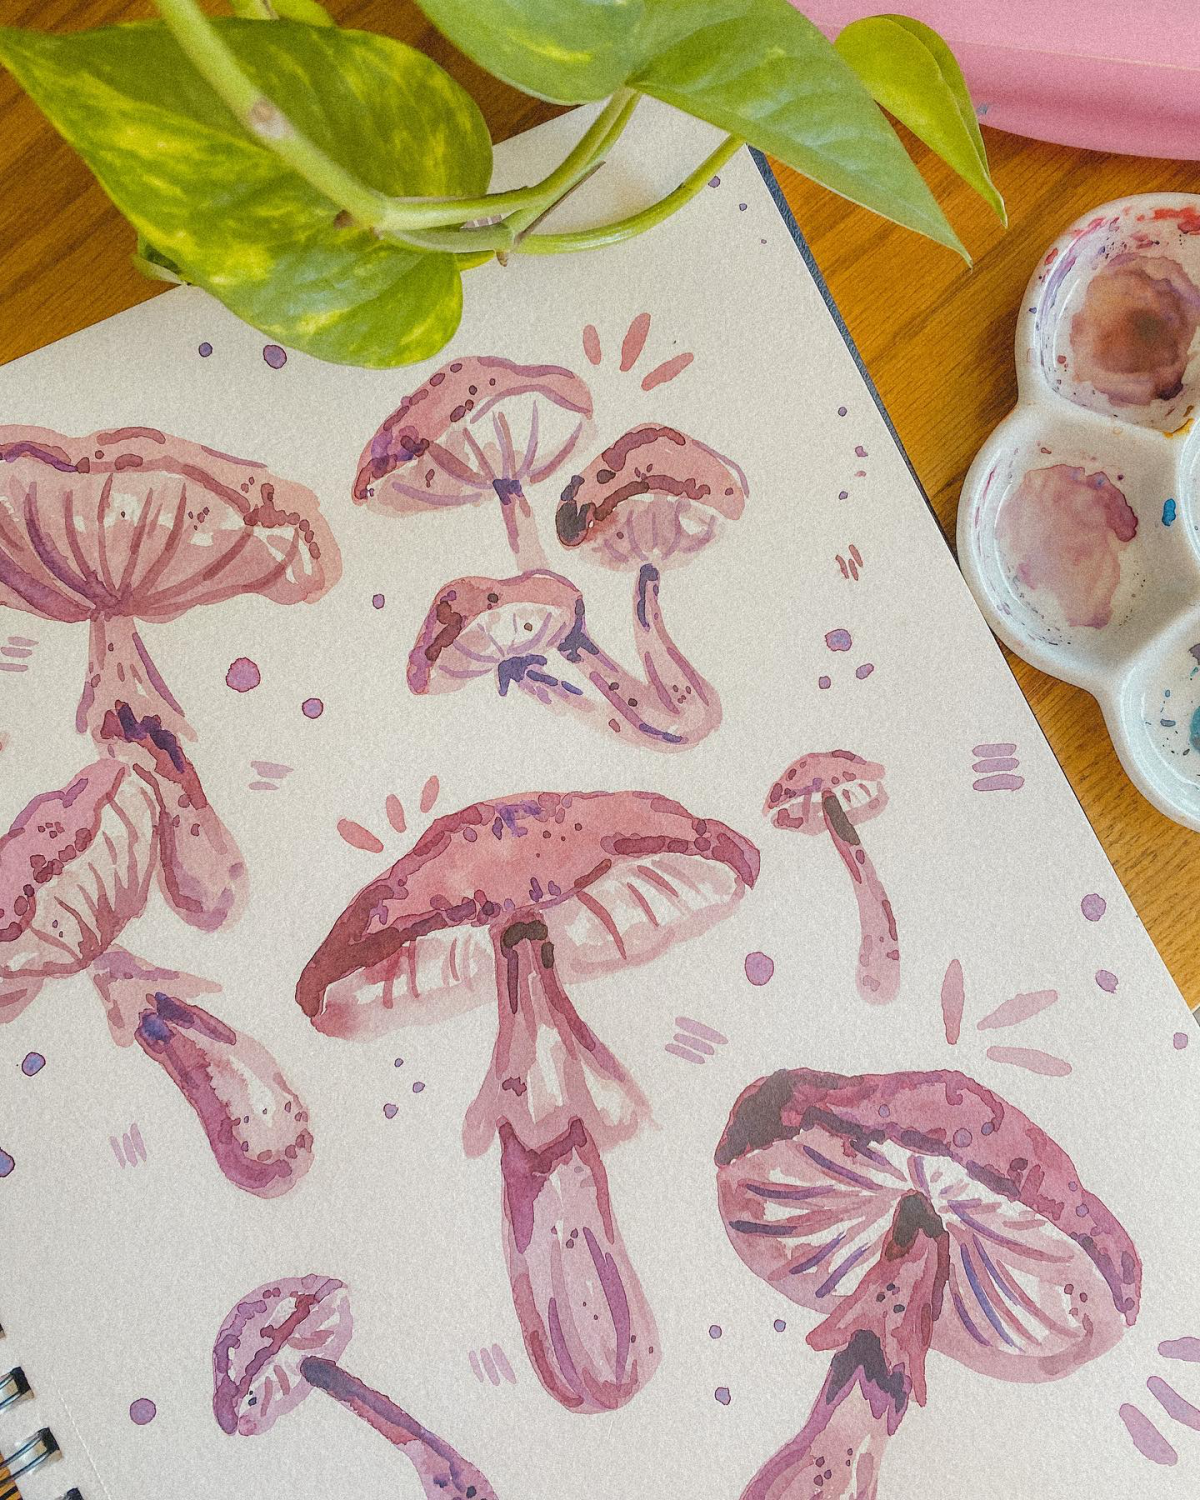 mushroom drawing in pink and purple paints